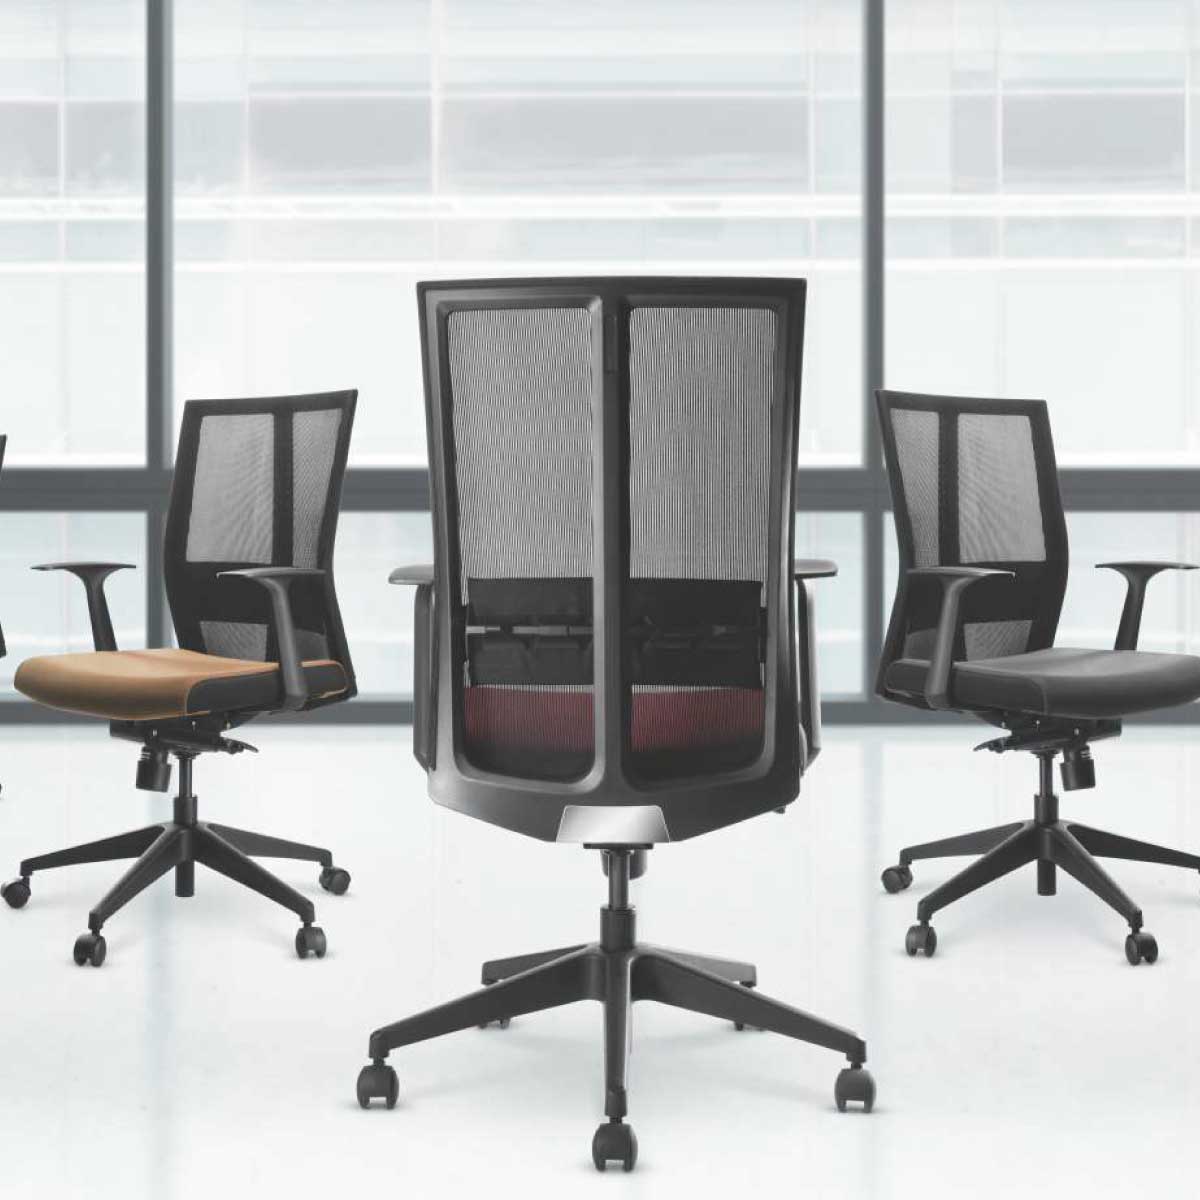 Visitor Chair Manufacturers, Suppliers in Greater Kailash Ii